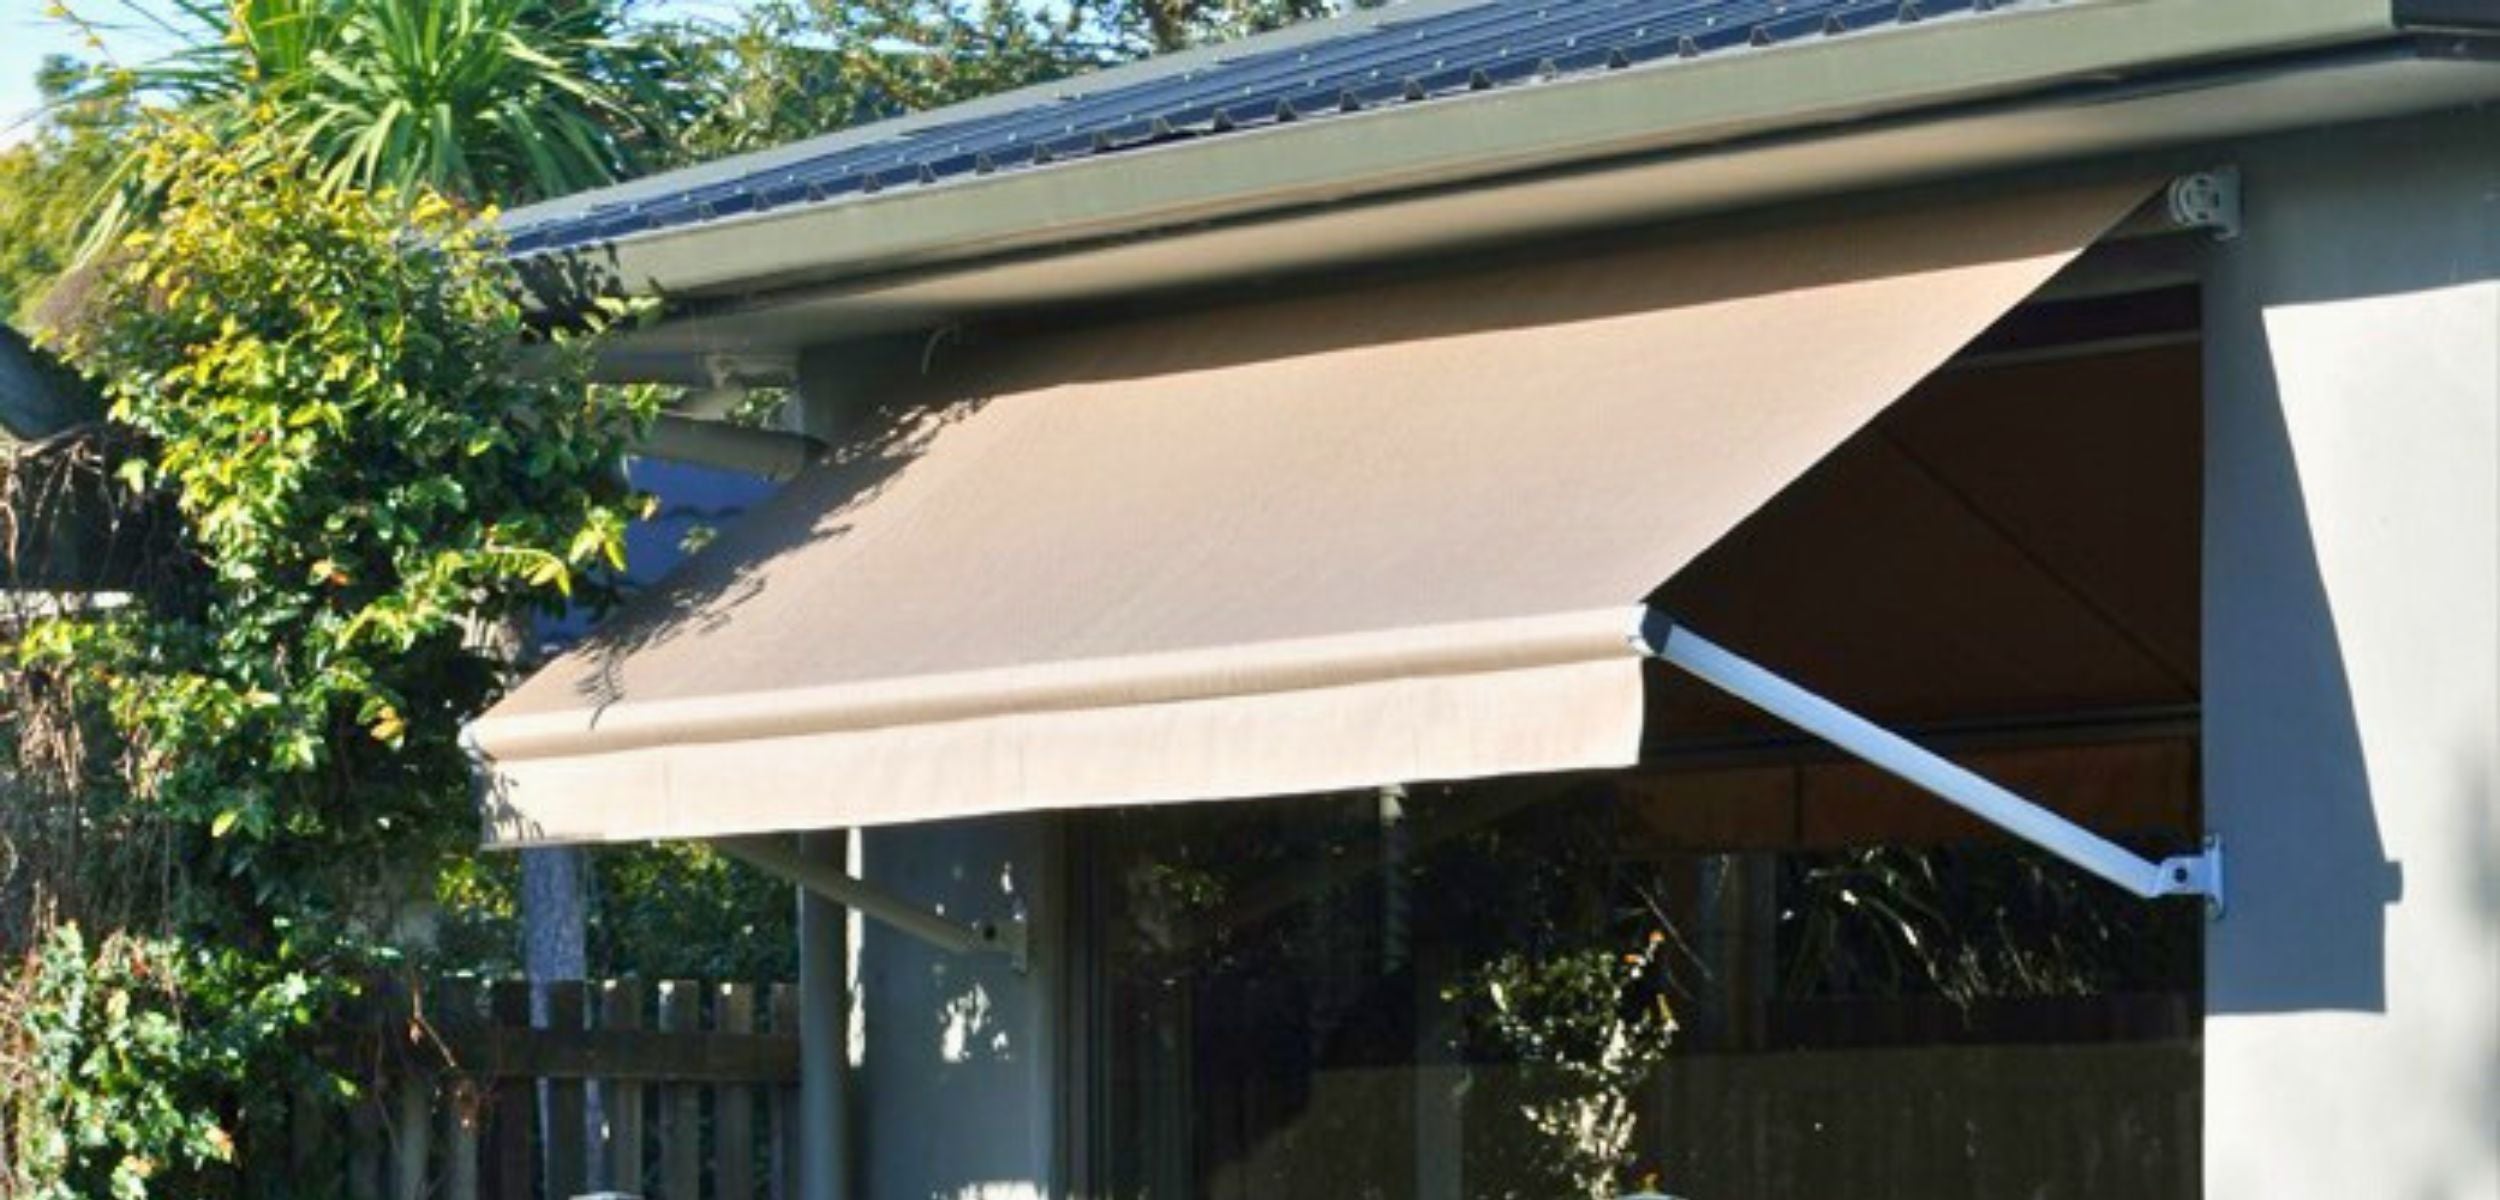 Experience convenience with Motorised Outdoor Blinds.